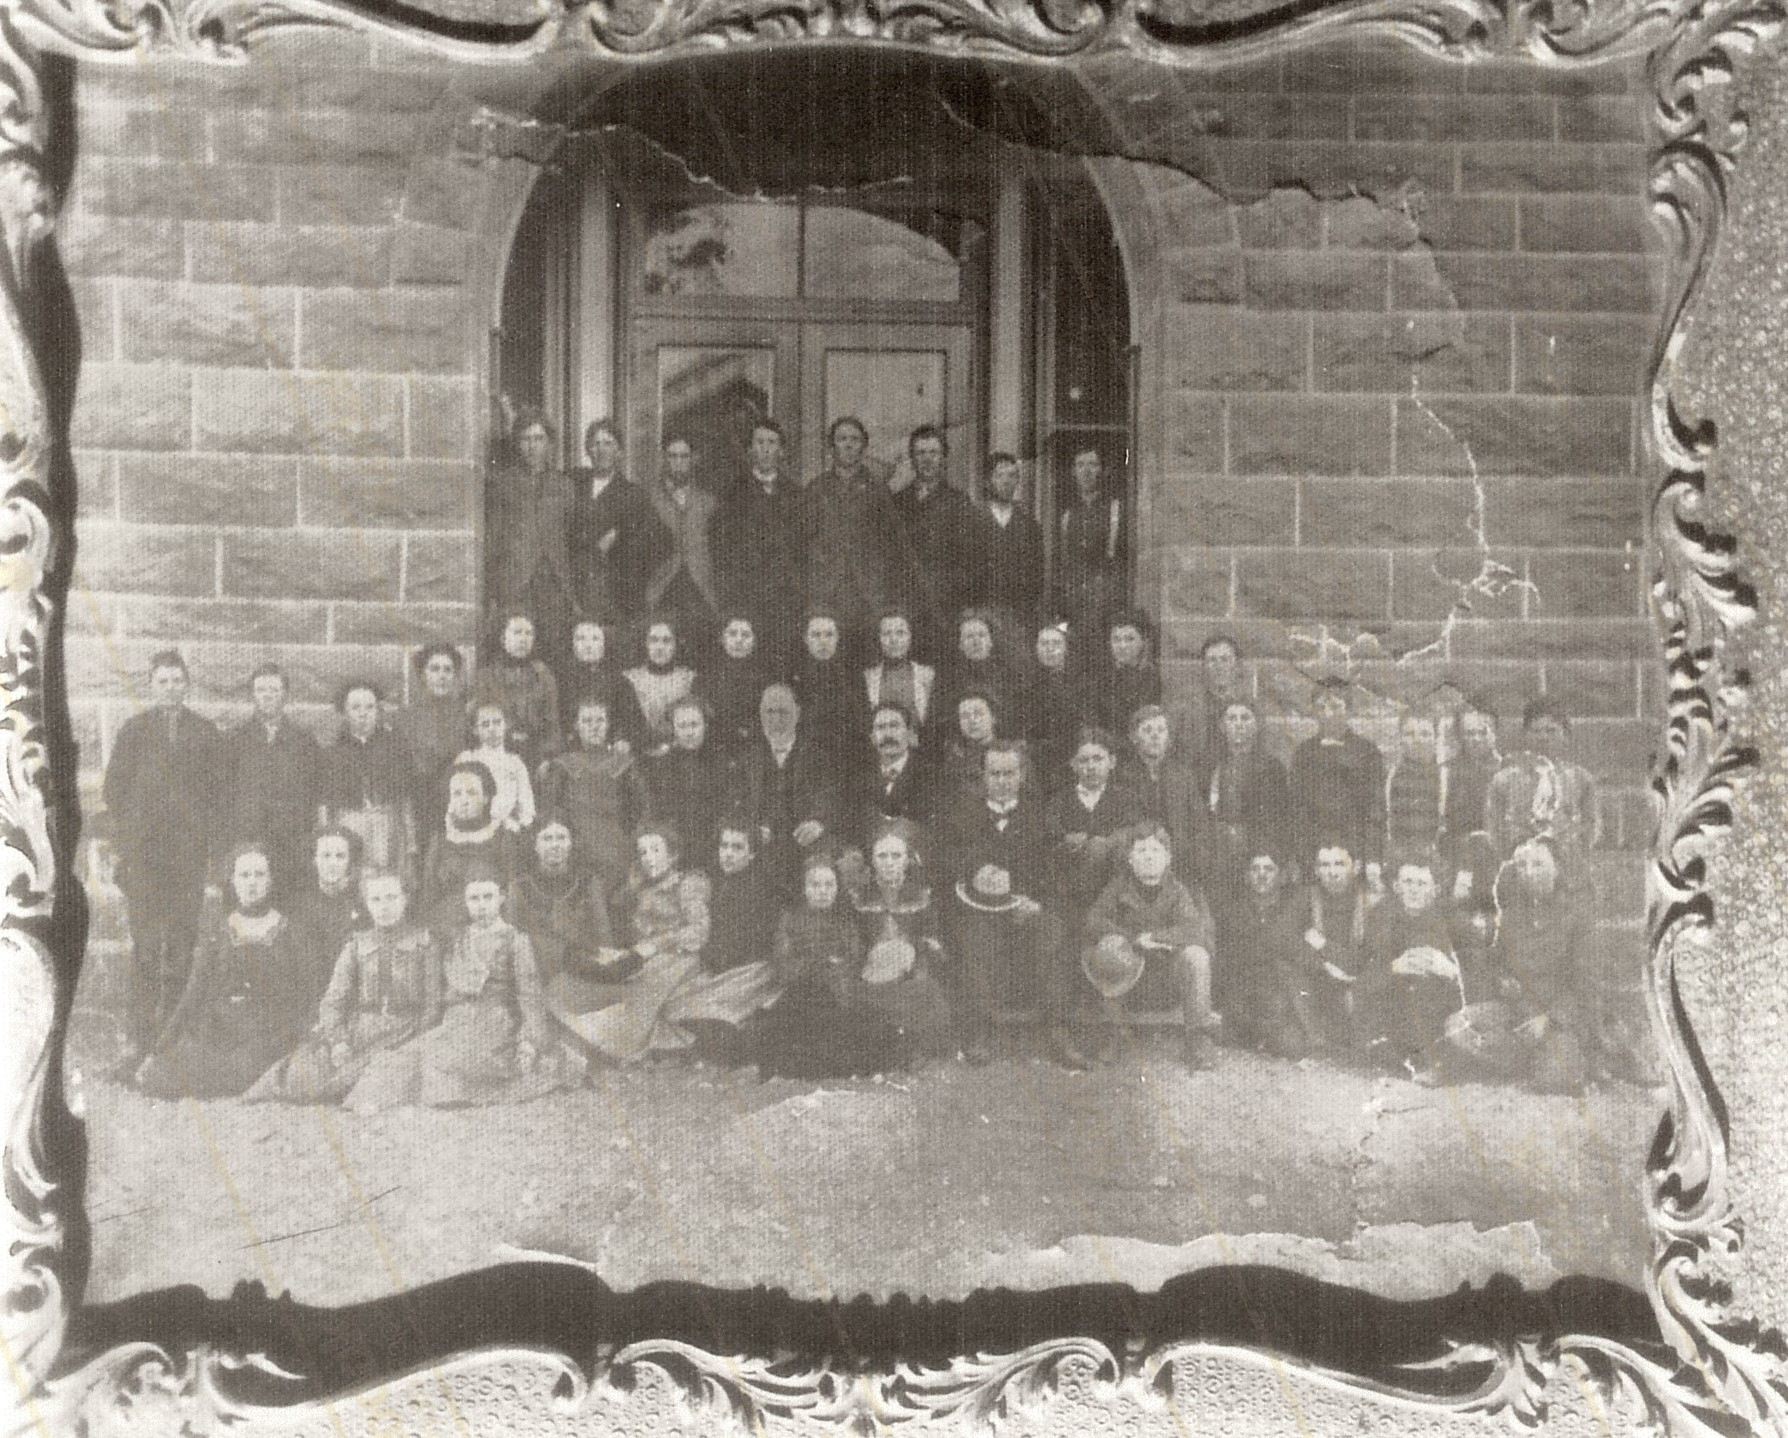 7th grade students and teachers in 1901 at the Woodward School in St. George, Utah